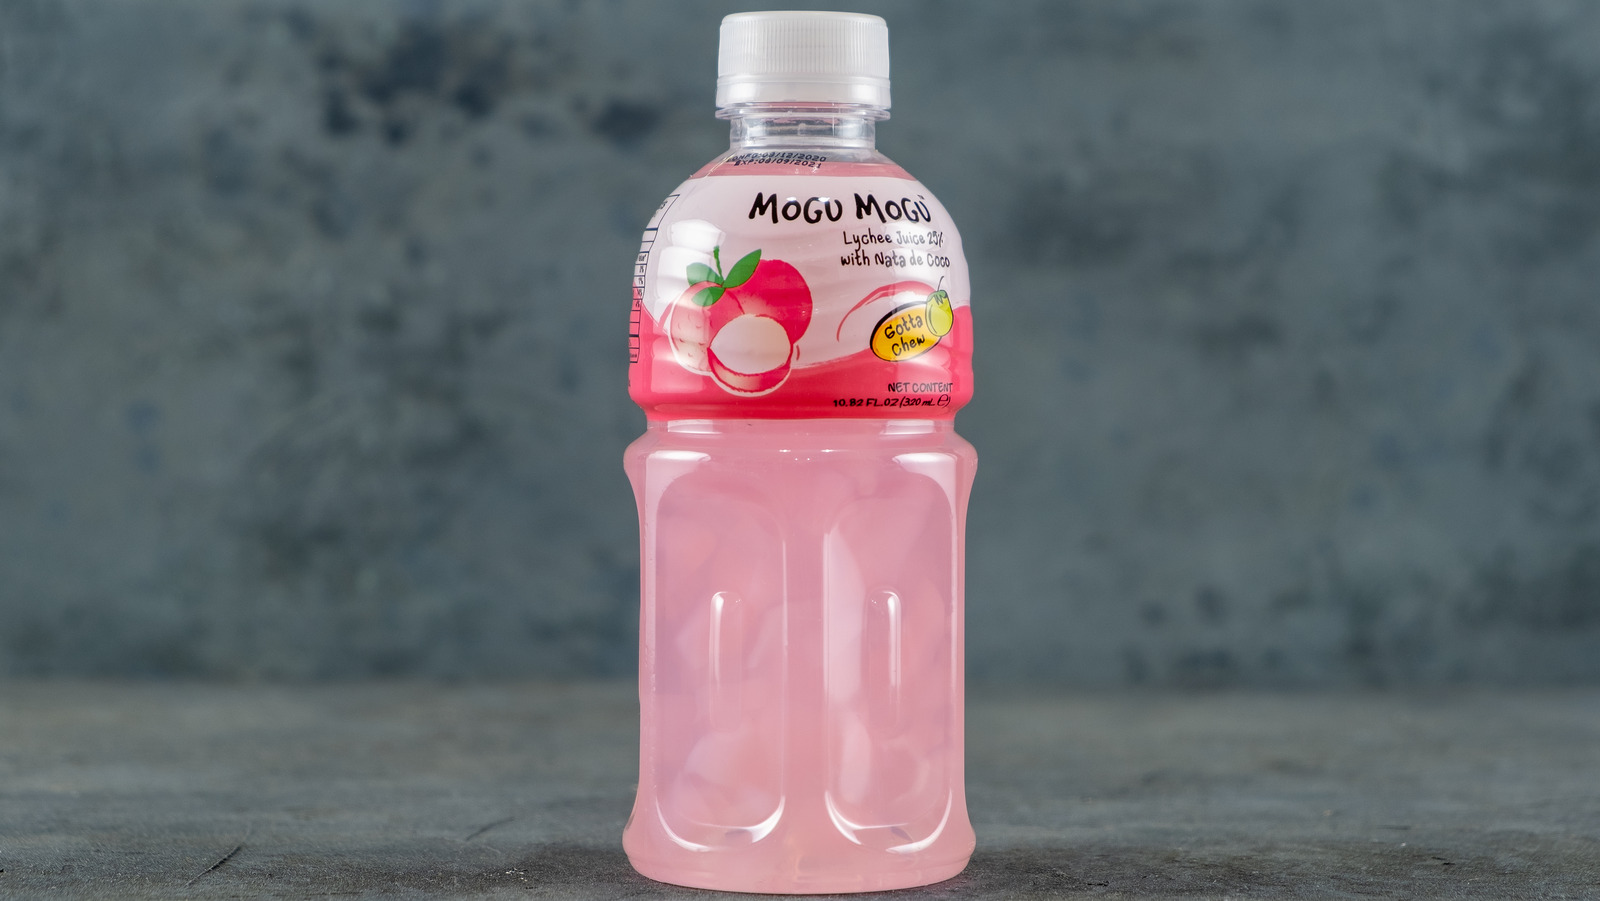 Mogu Mogu: The Fruity Thai Drink That's Full Of Coconut Jelly